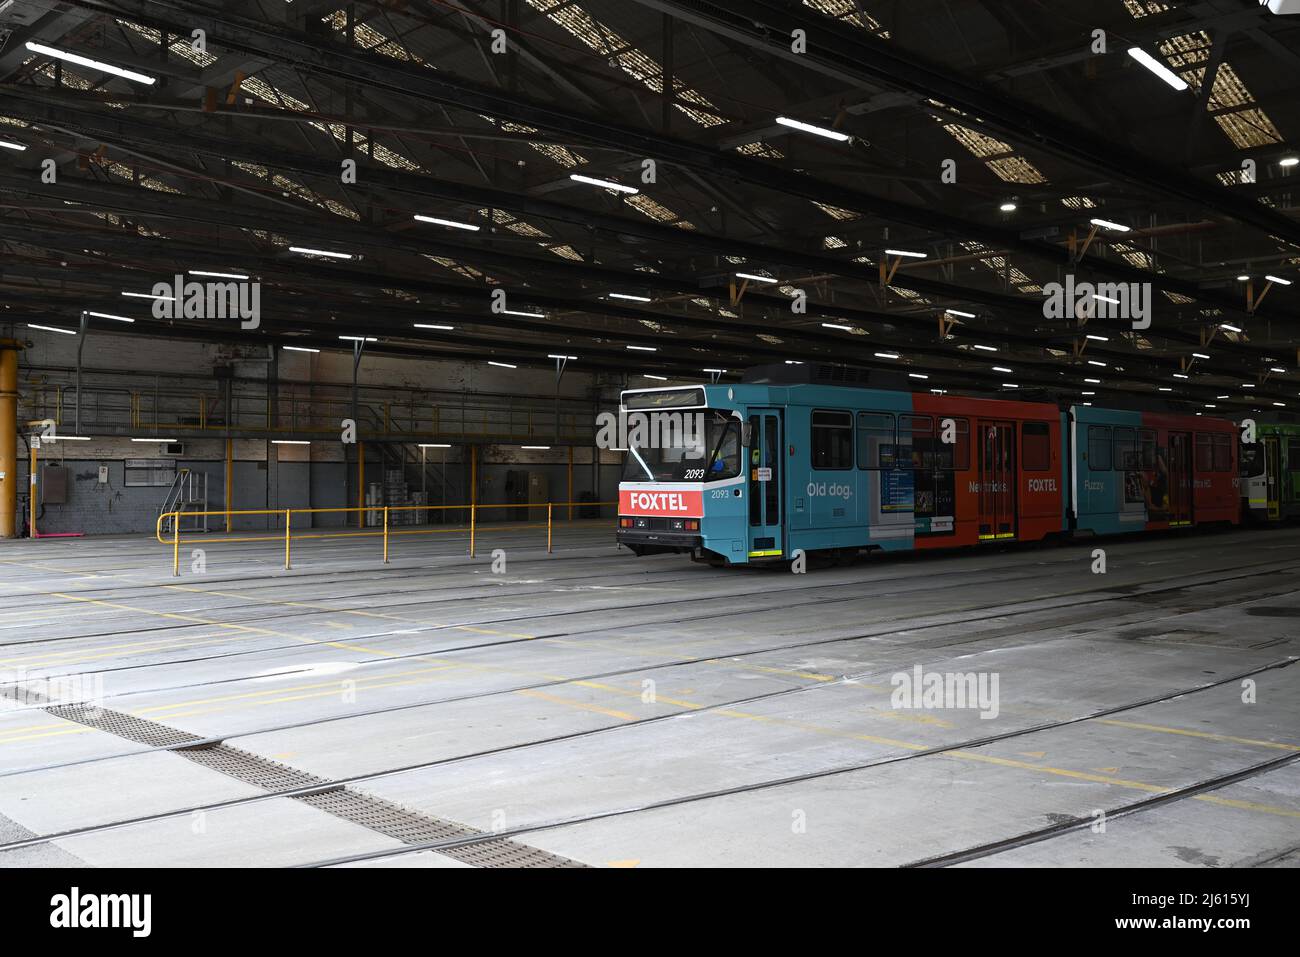 Almost empty interior of the Camberwell Tram Depot shed, with a B-Class tram featuring Foxtel advertising sitting in the middle Stock Photo